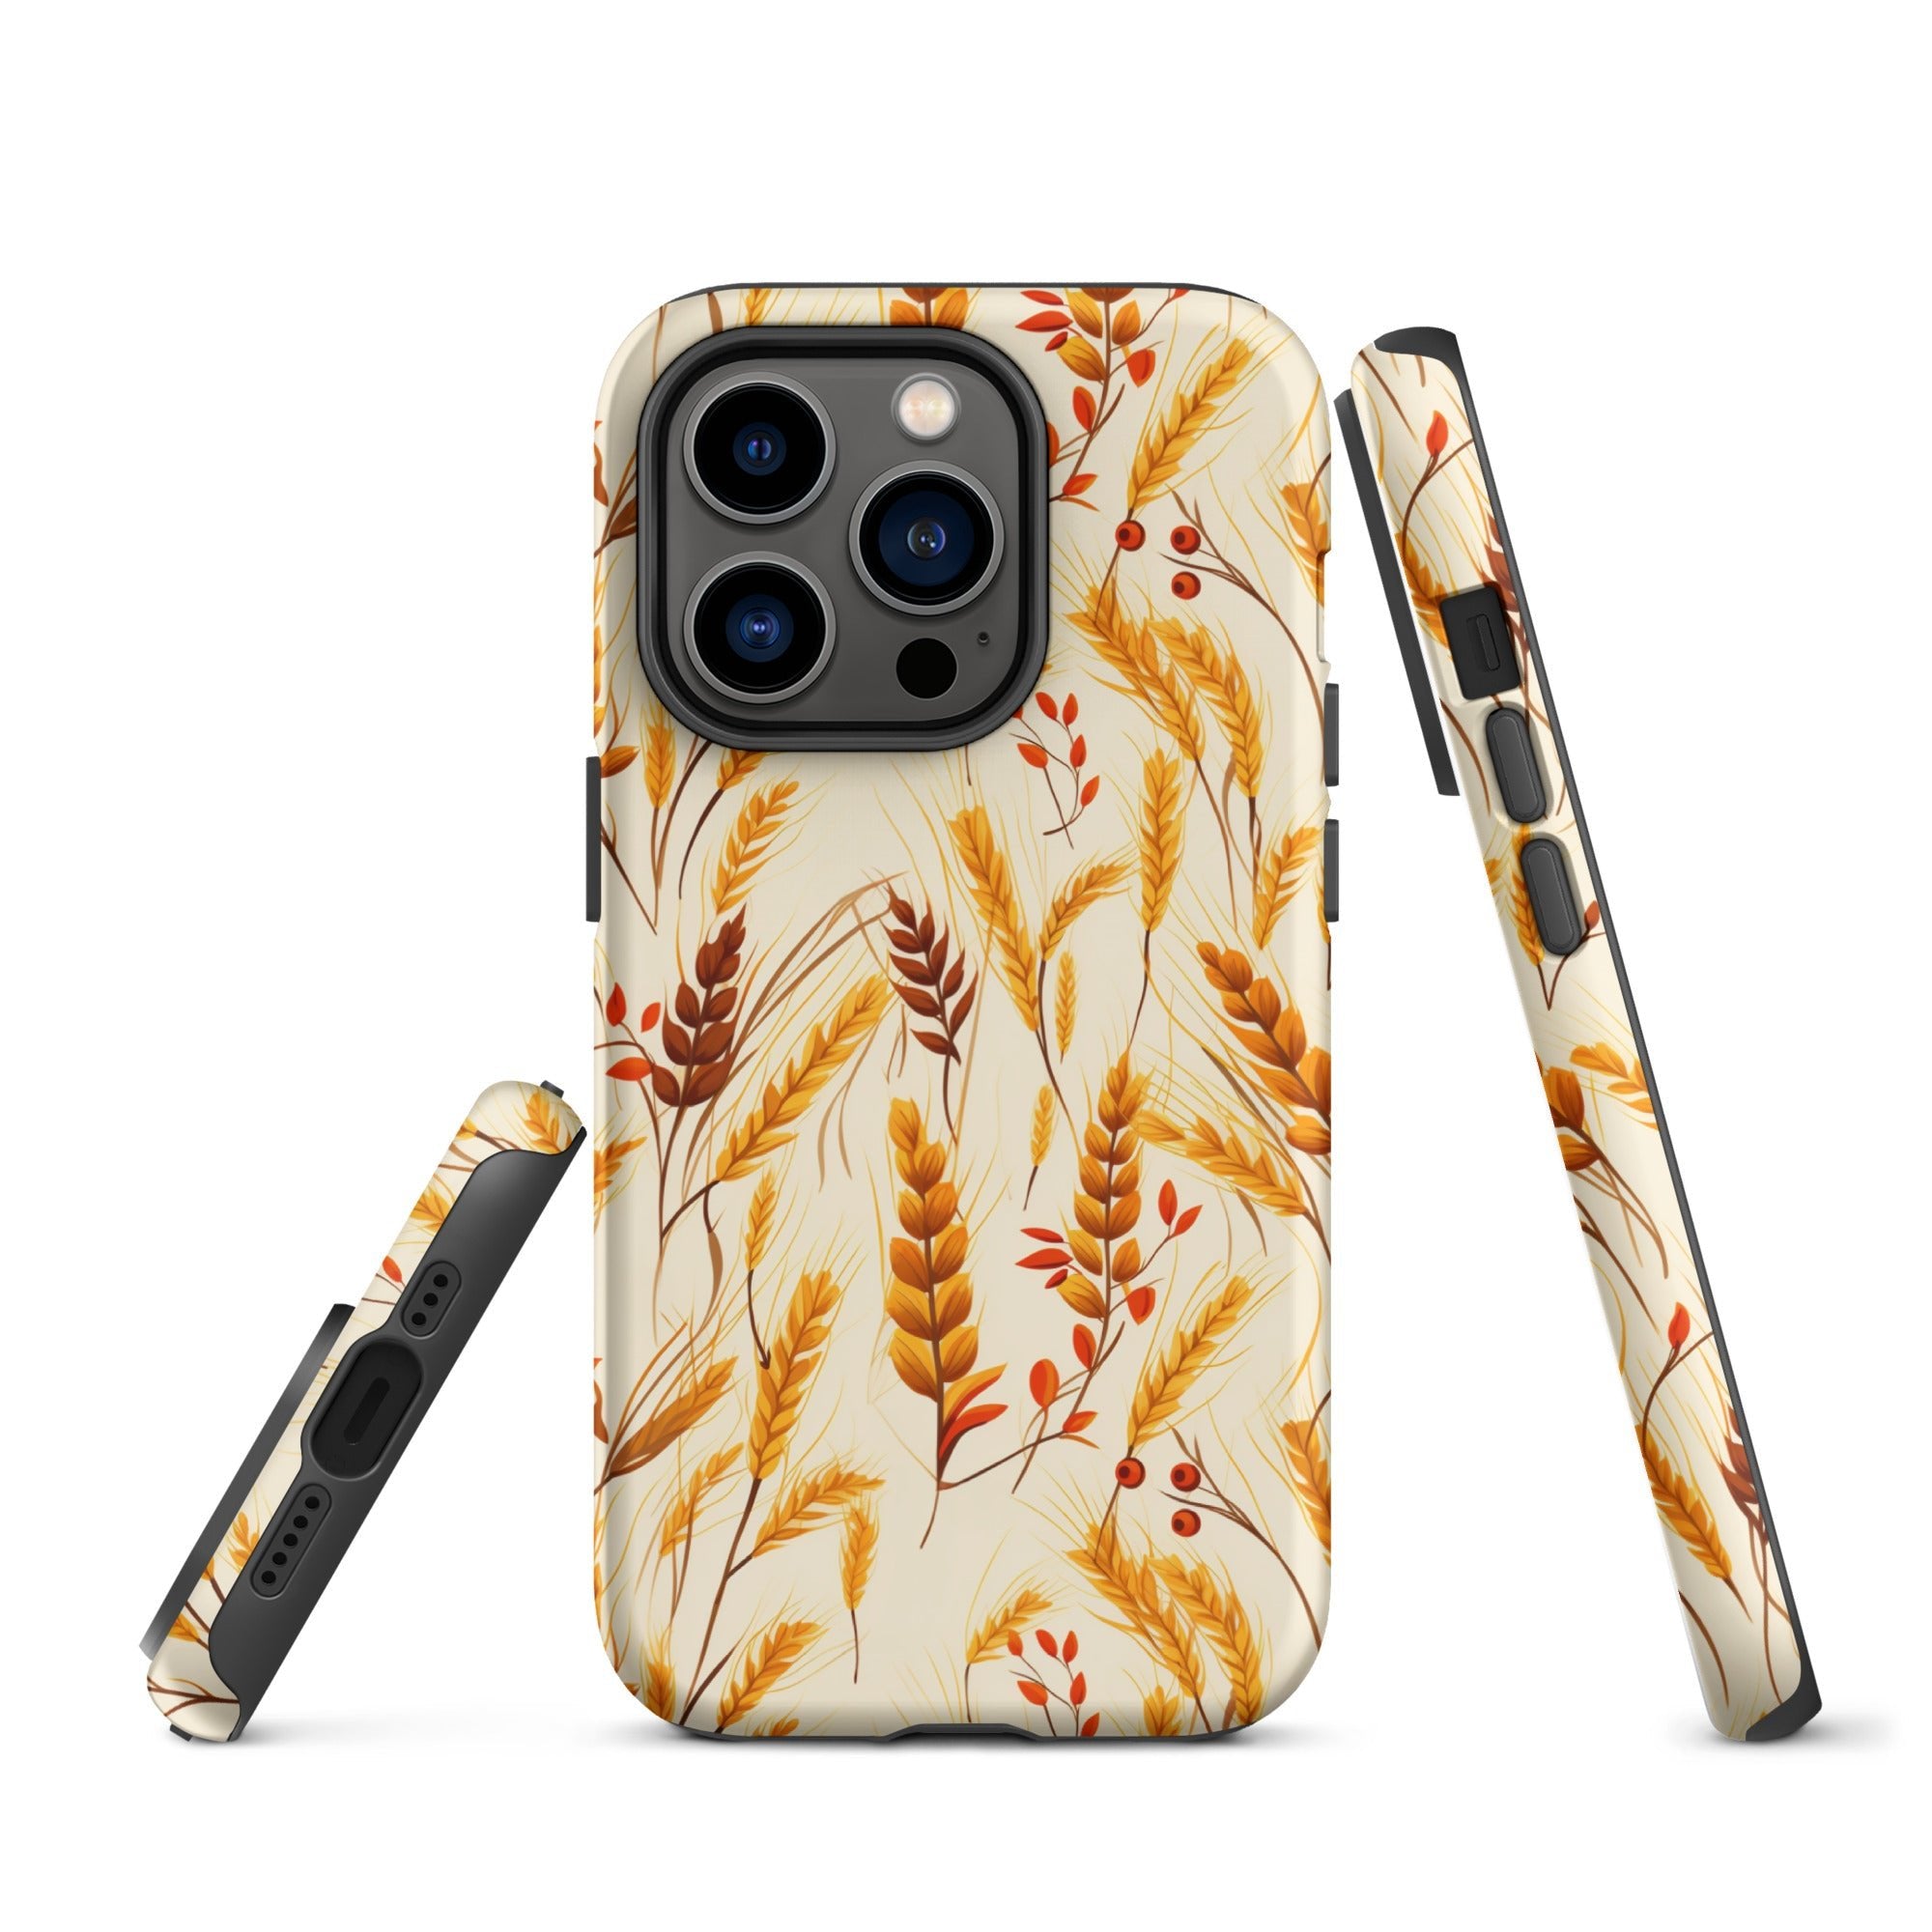 Golden Harvest - An Autumn Collage of Wheat and Berries - iPhone Case - Pattern Symphony